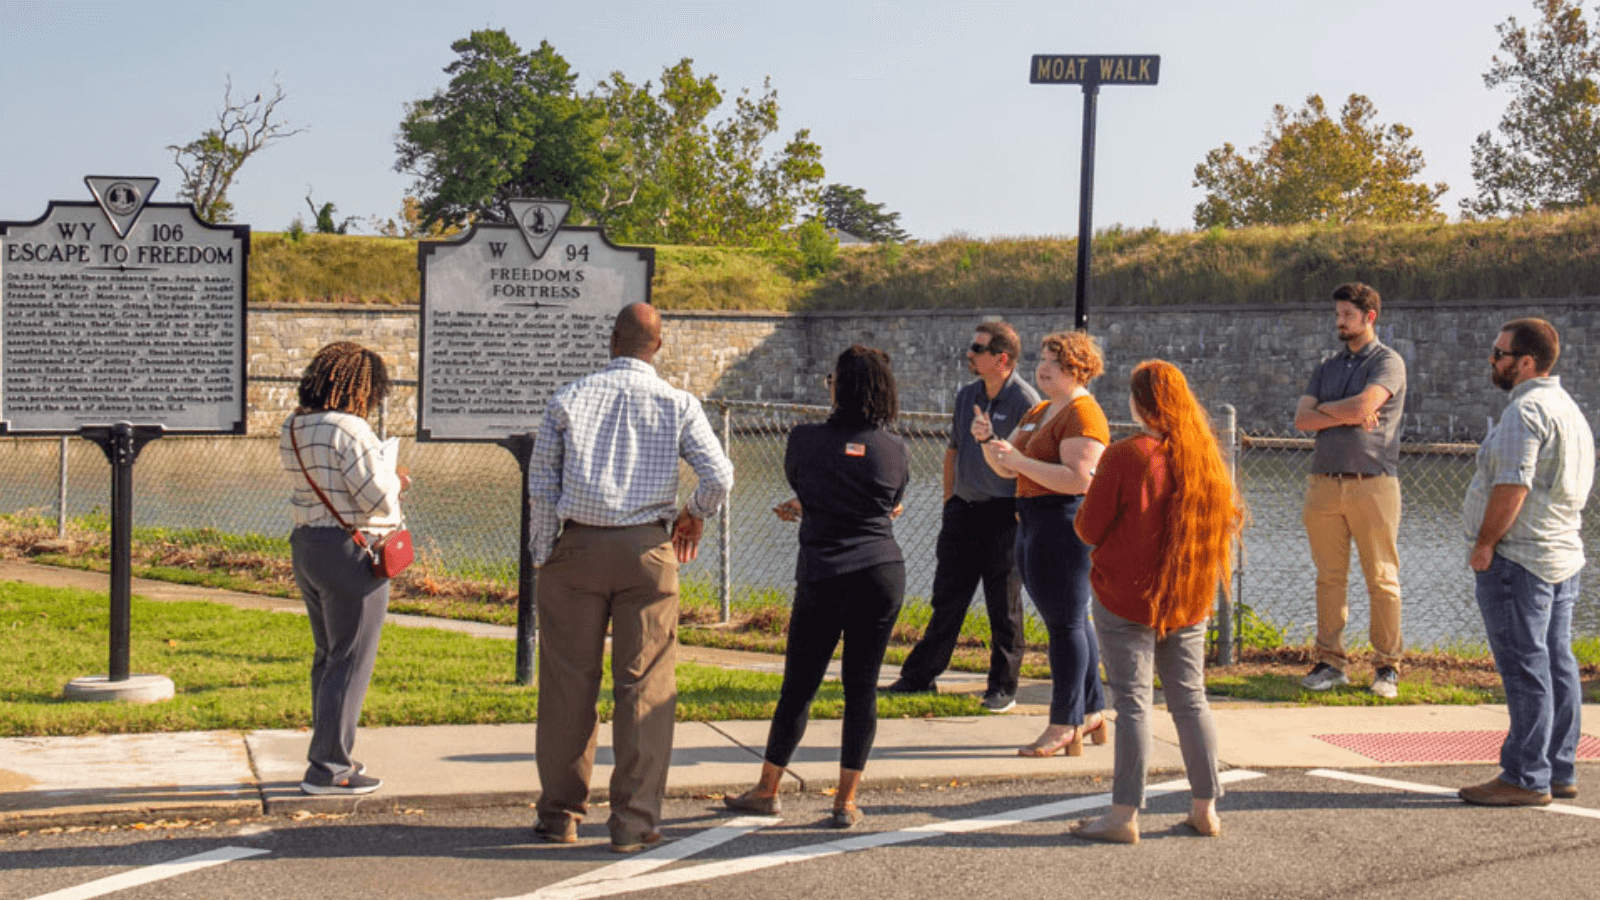 A group people touring fort monroe looking a the Freedom Fortress historical marker.